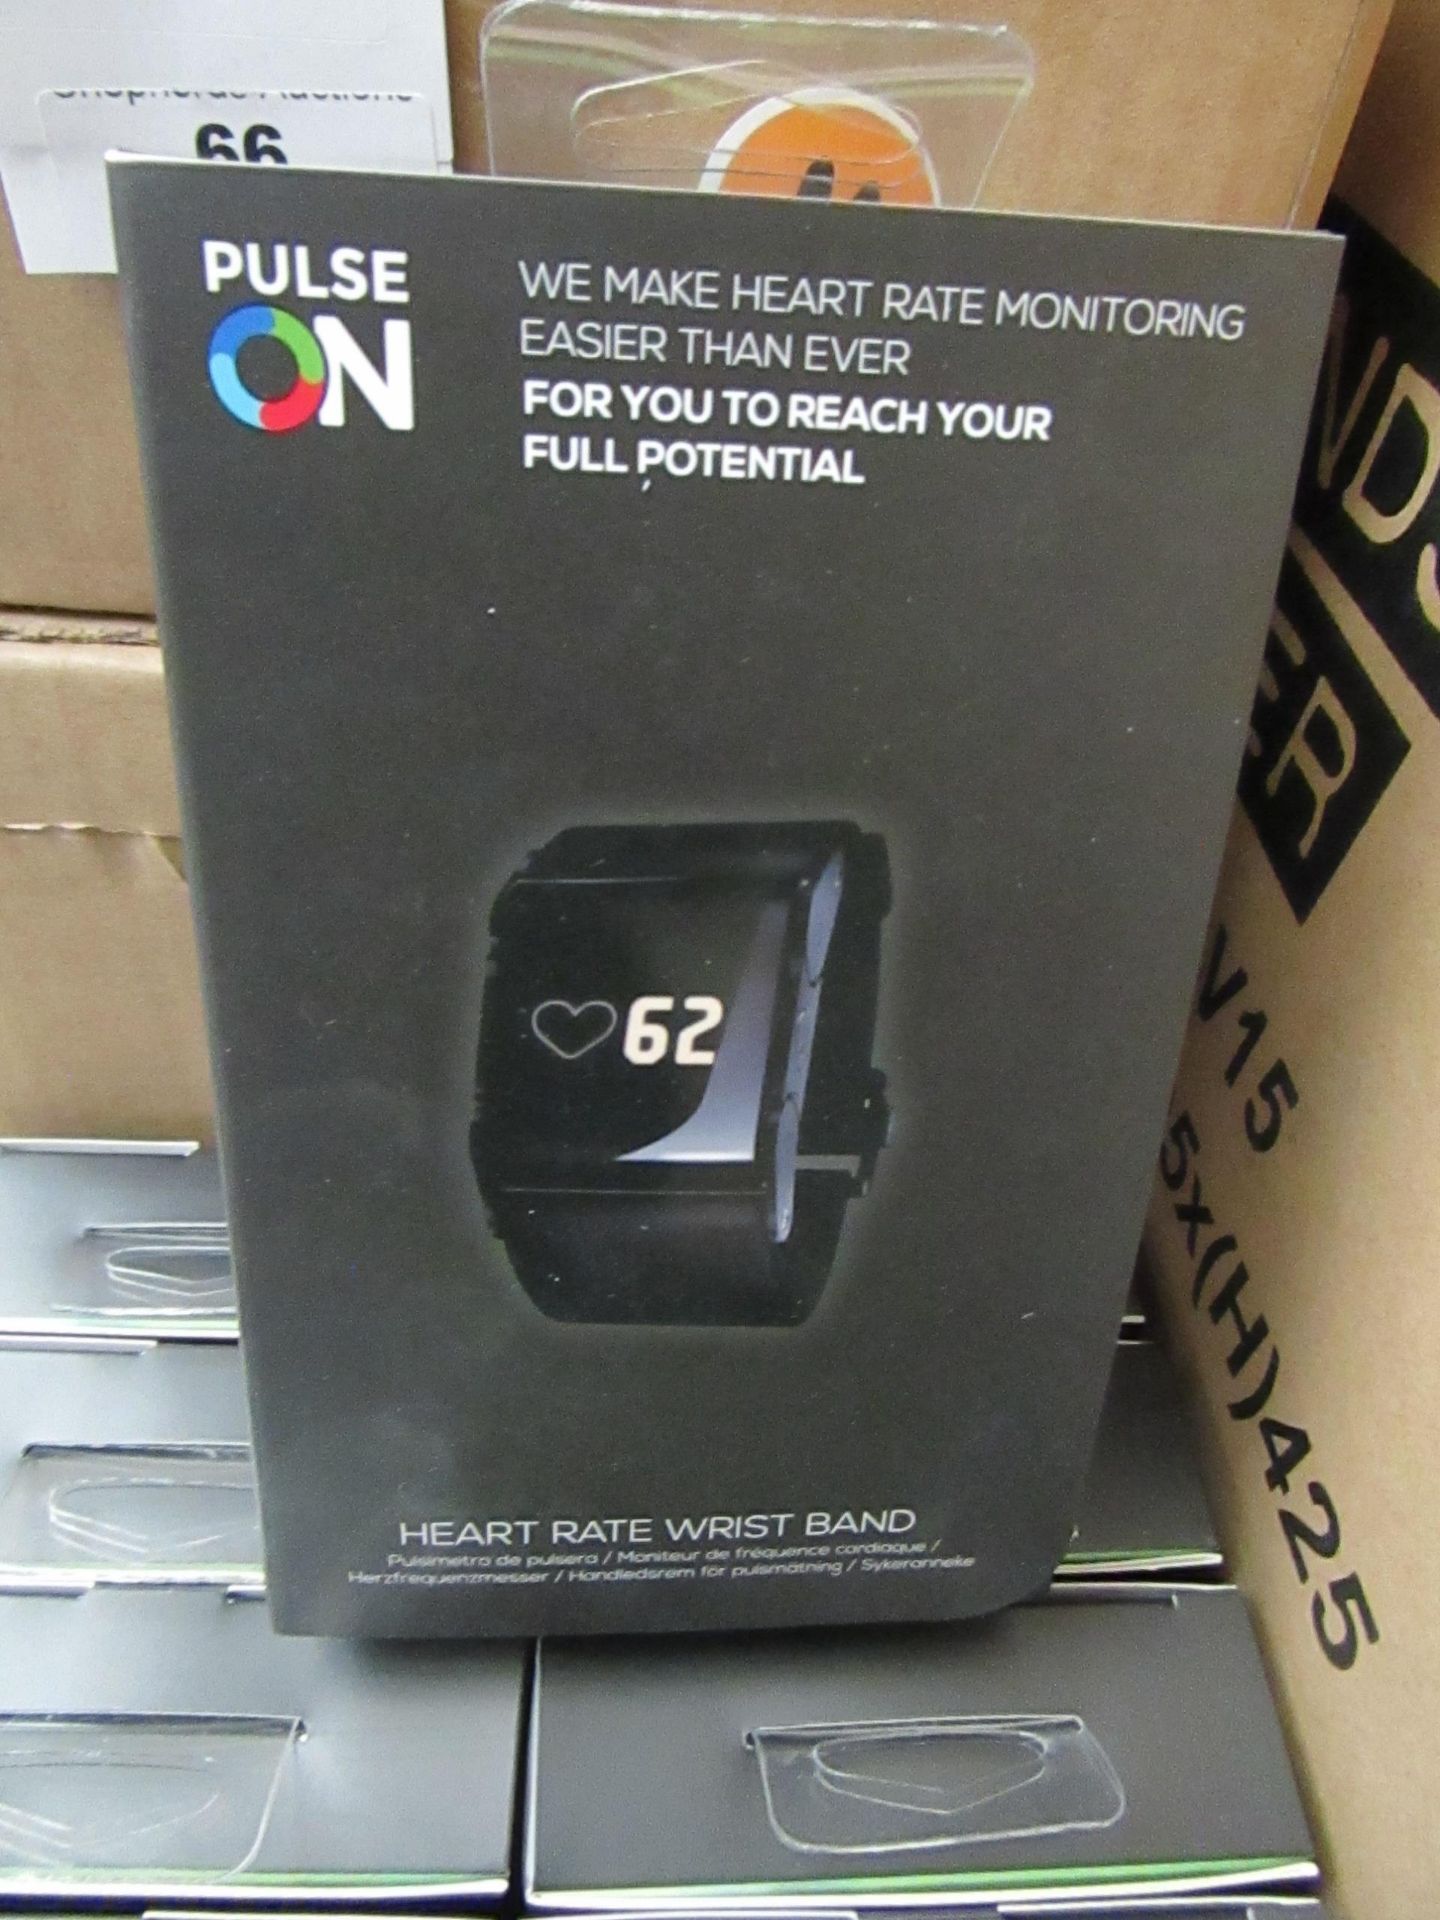 10x PulseON - Heart Rate Wrist Band - New & Boxed.